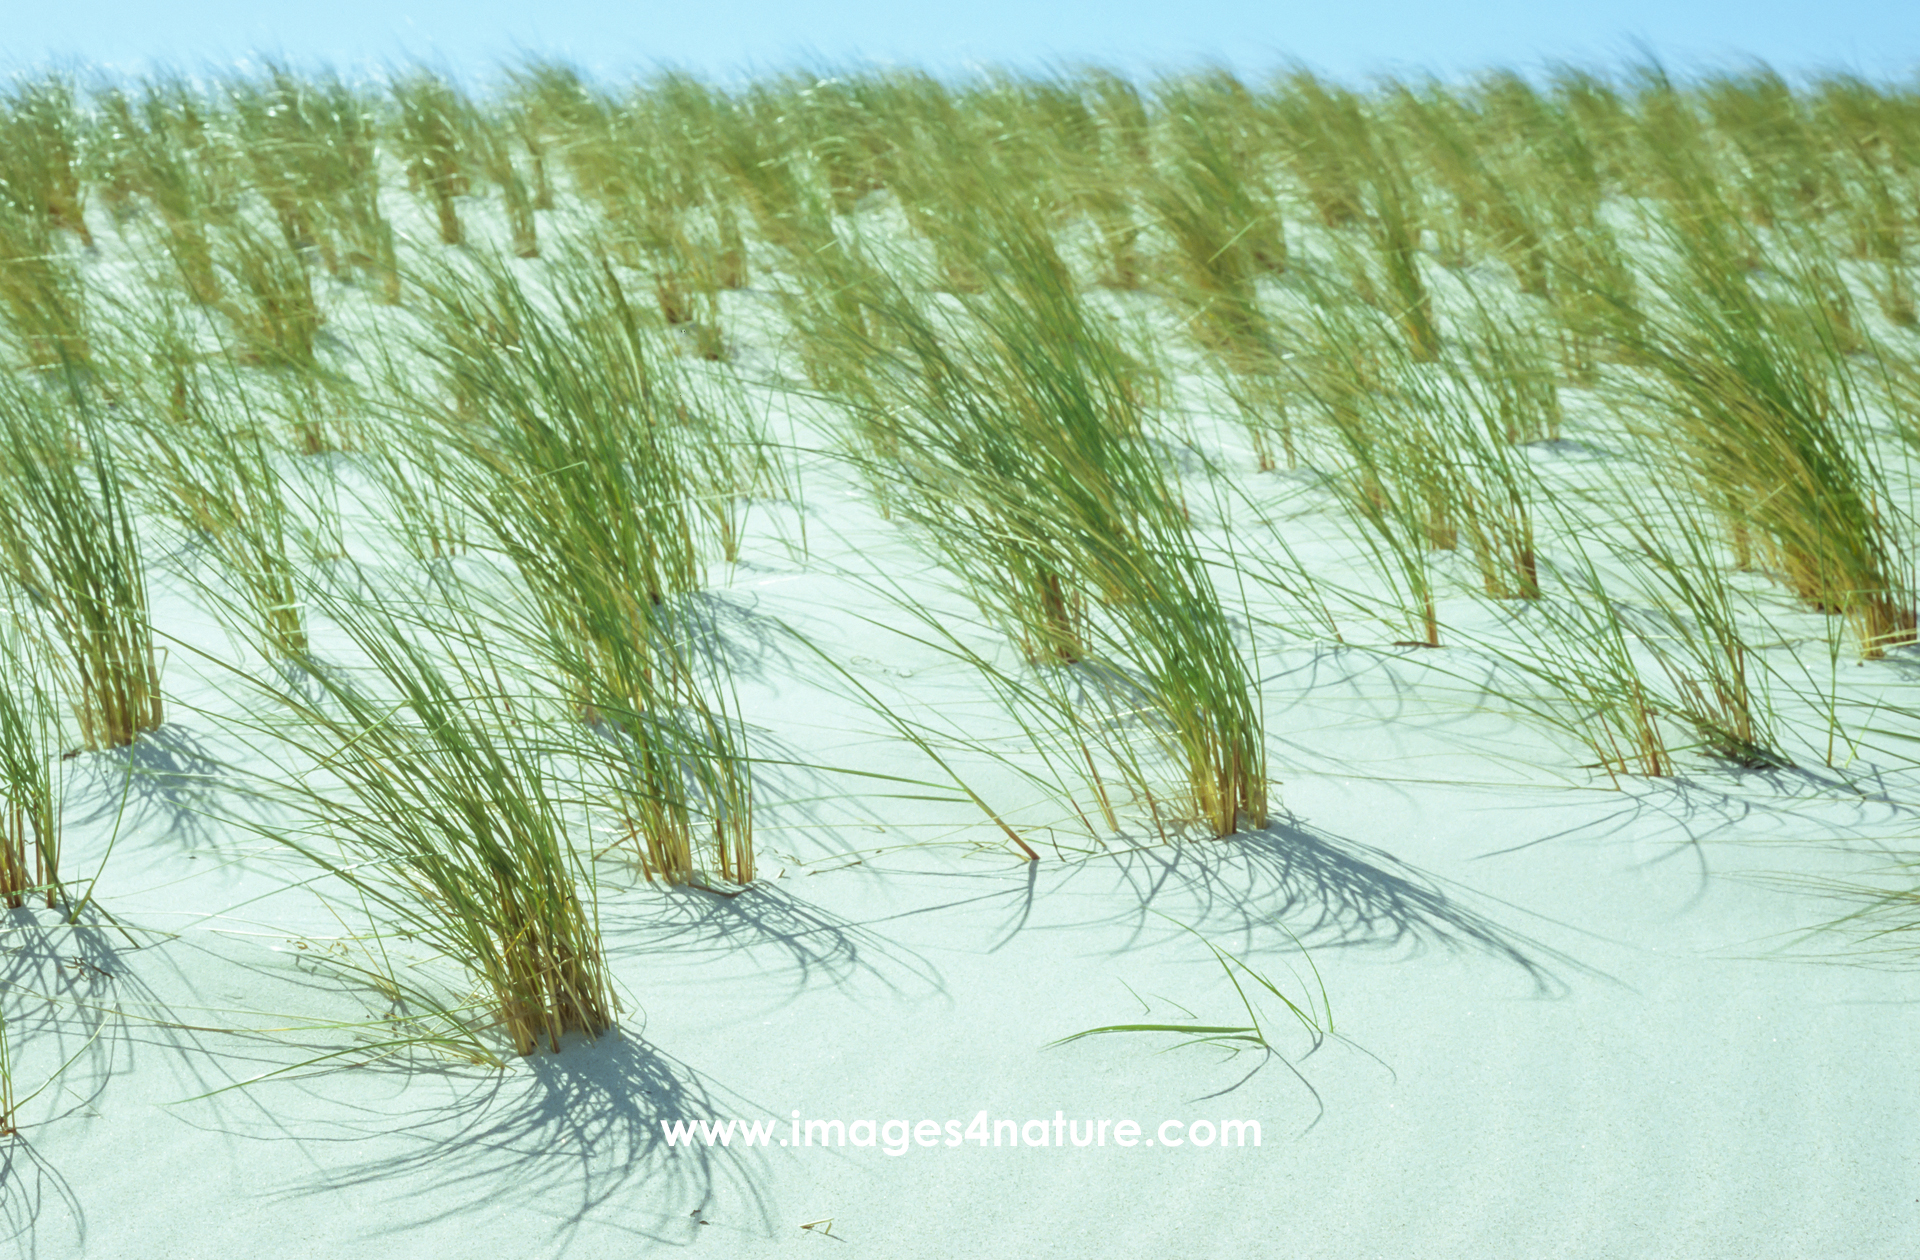 Beach grass growing on a dune of white sand